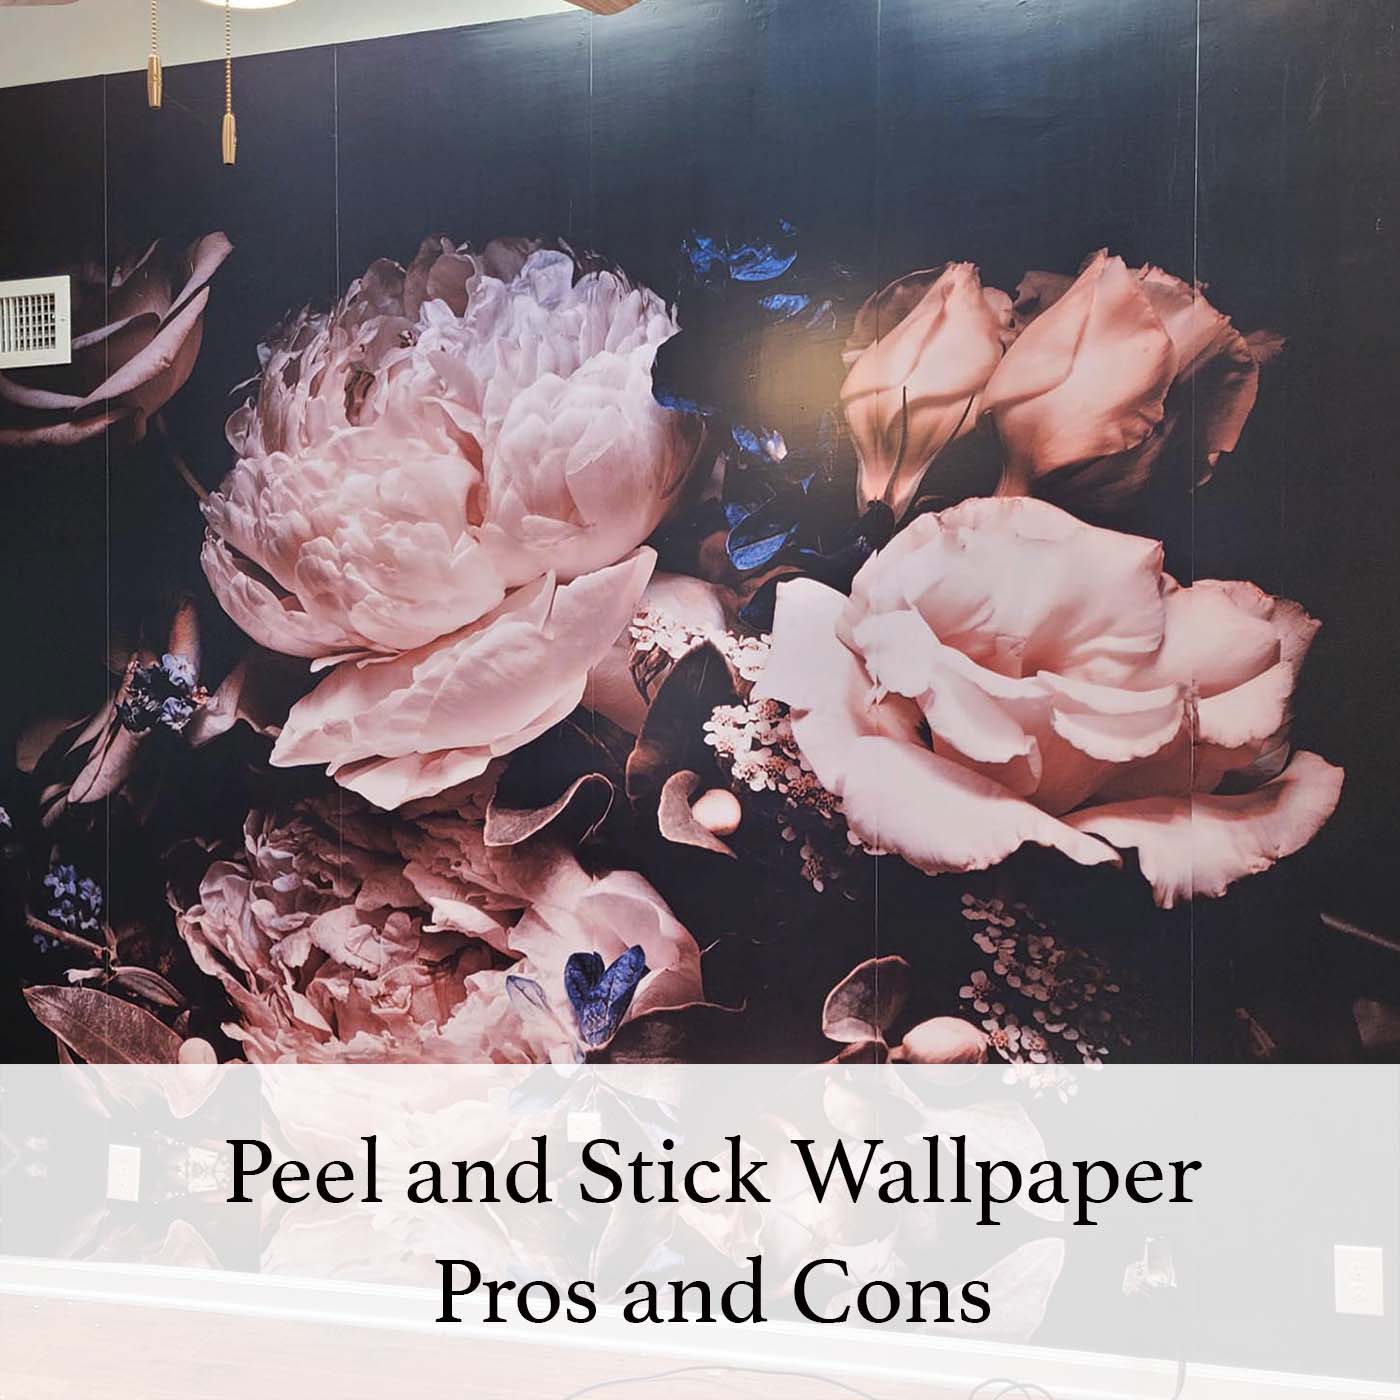 peel-and-stick-wallpaper-pros-and-cons-blog-paper-moon-painting